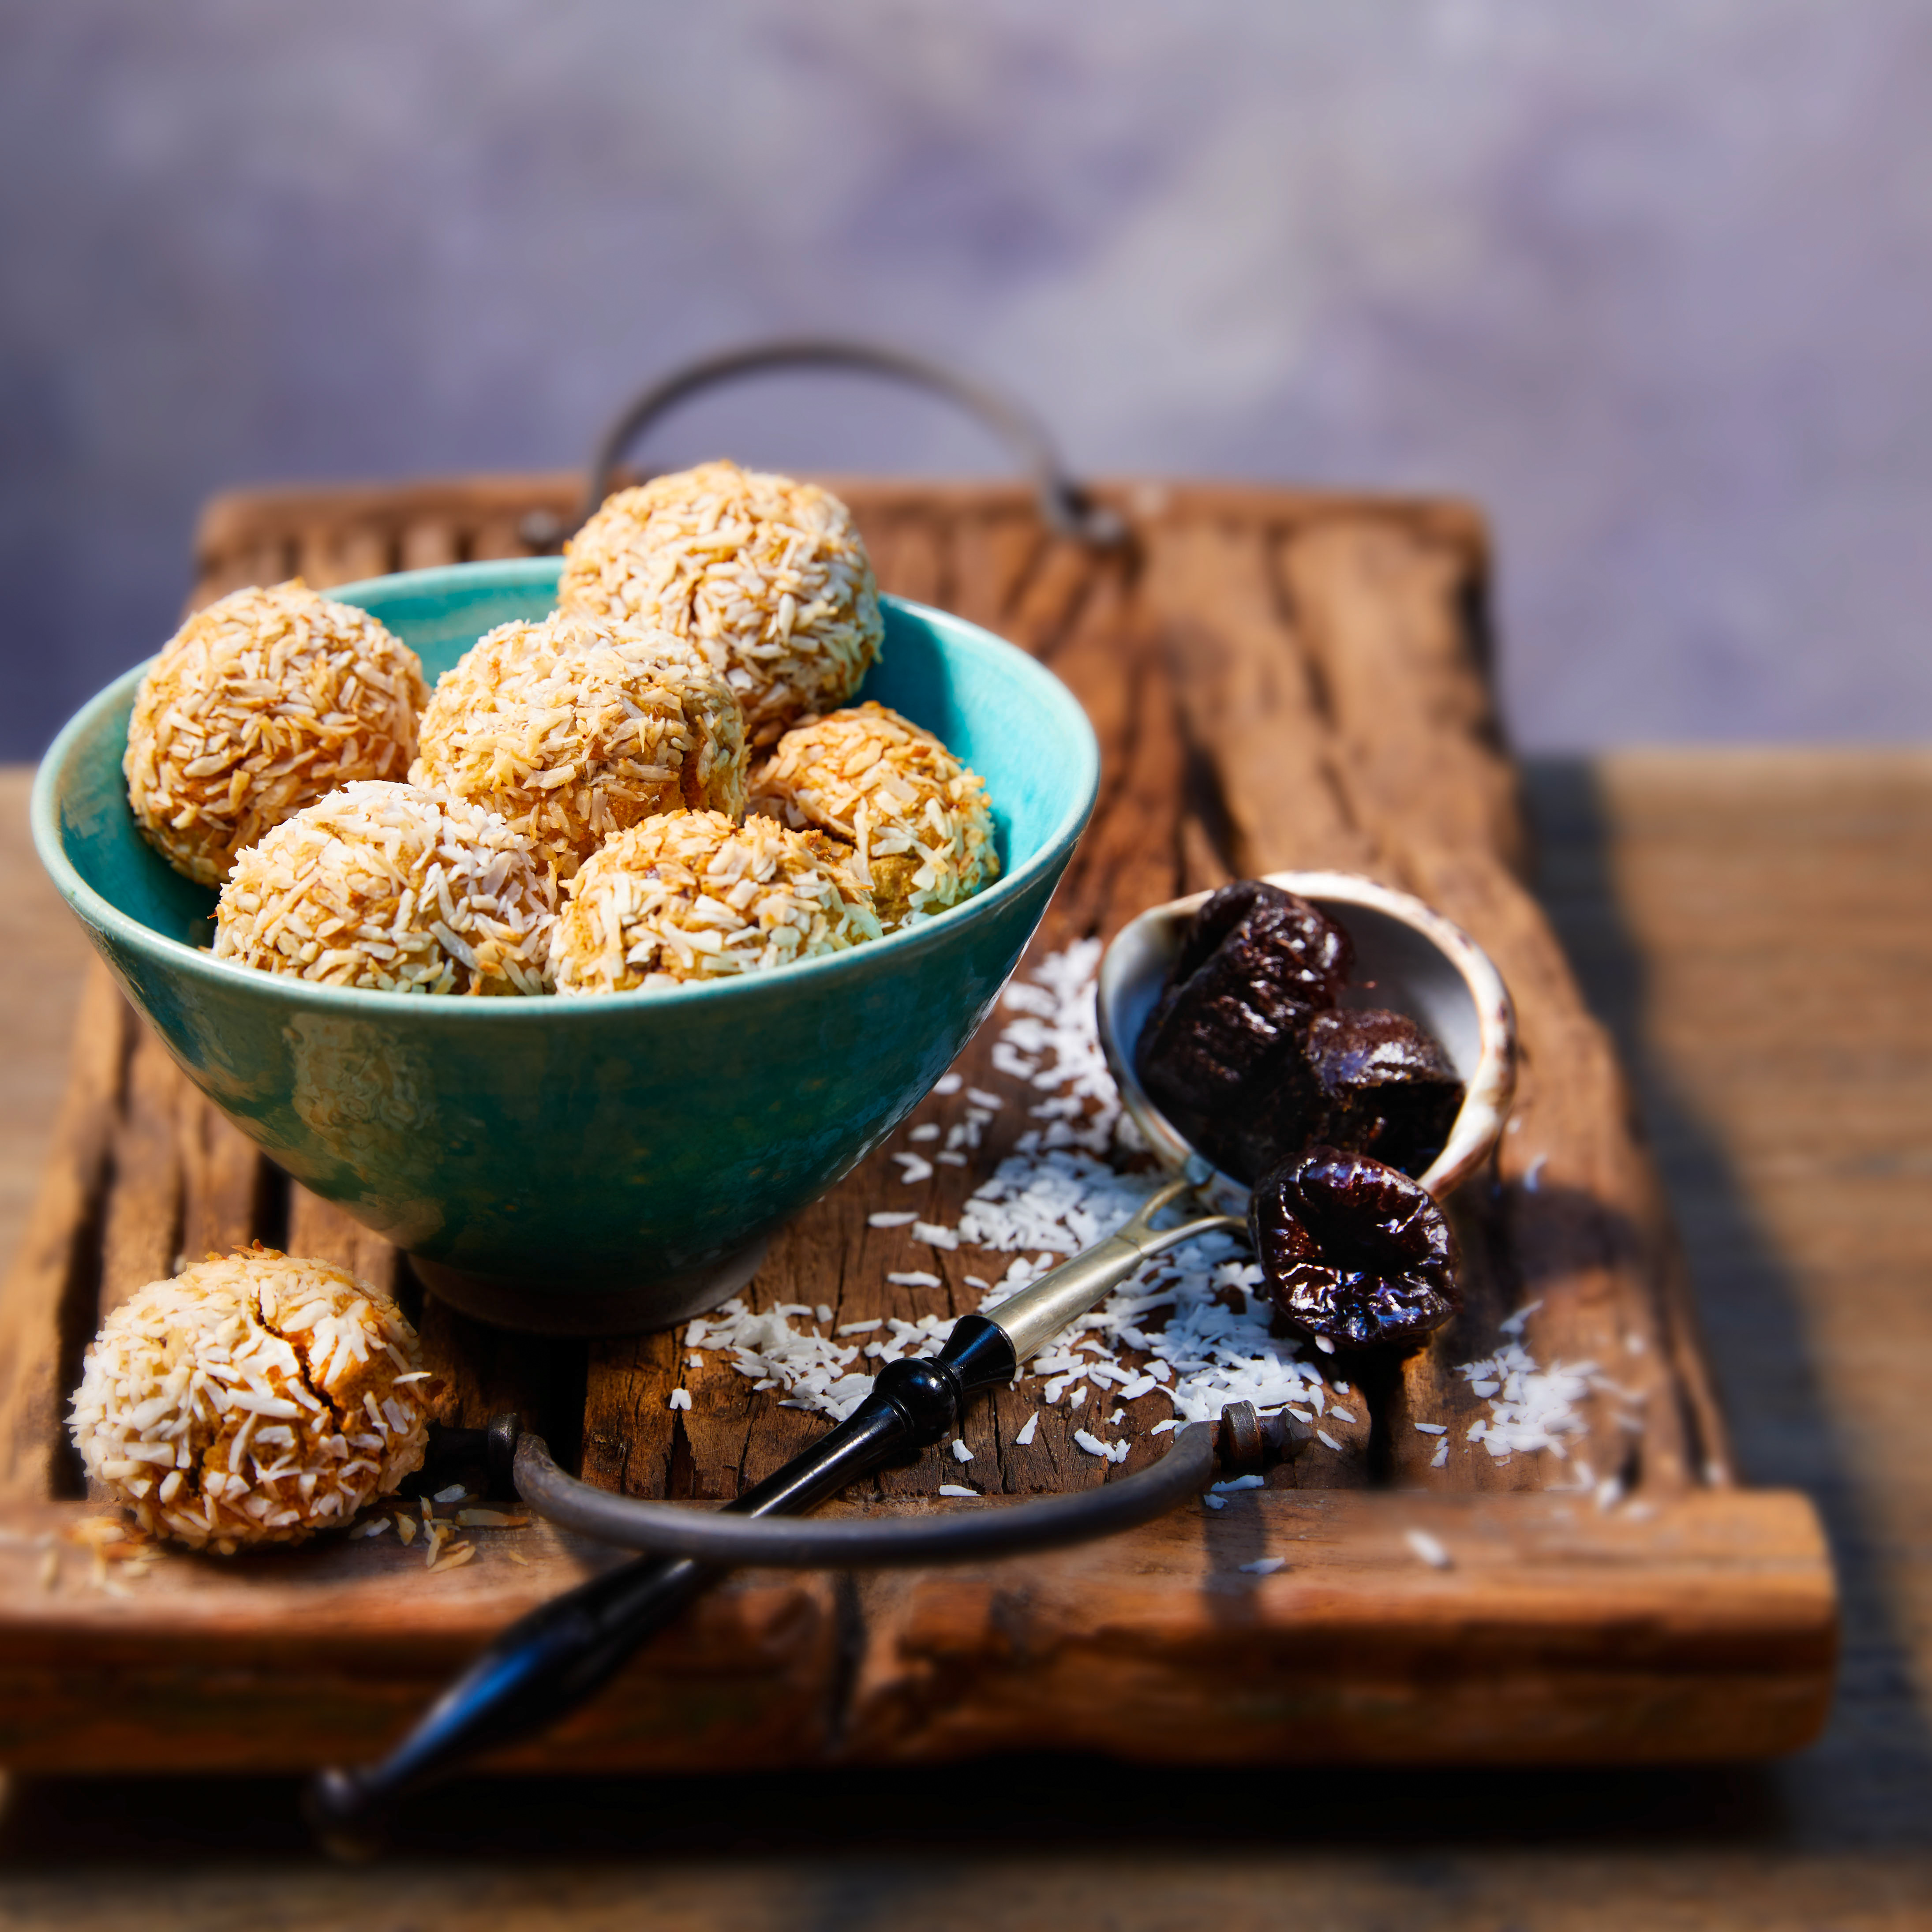 These lightly baked energy balls are perfect for a quick pick-me-up when on the go.  They’re the ideal healthy snack or sweet treat